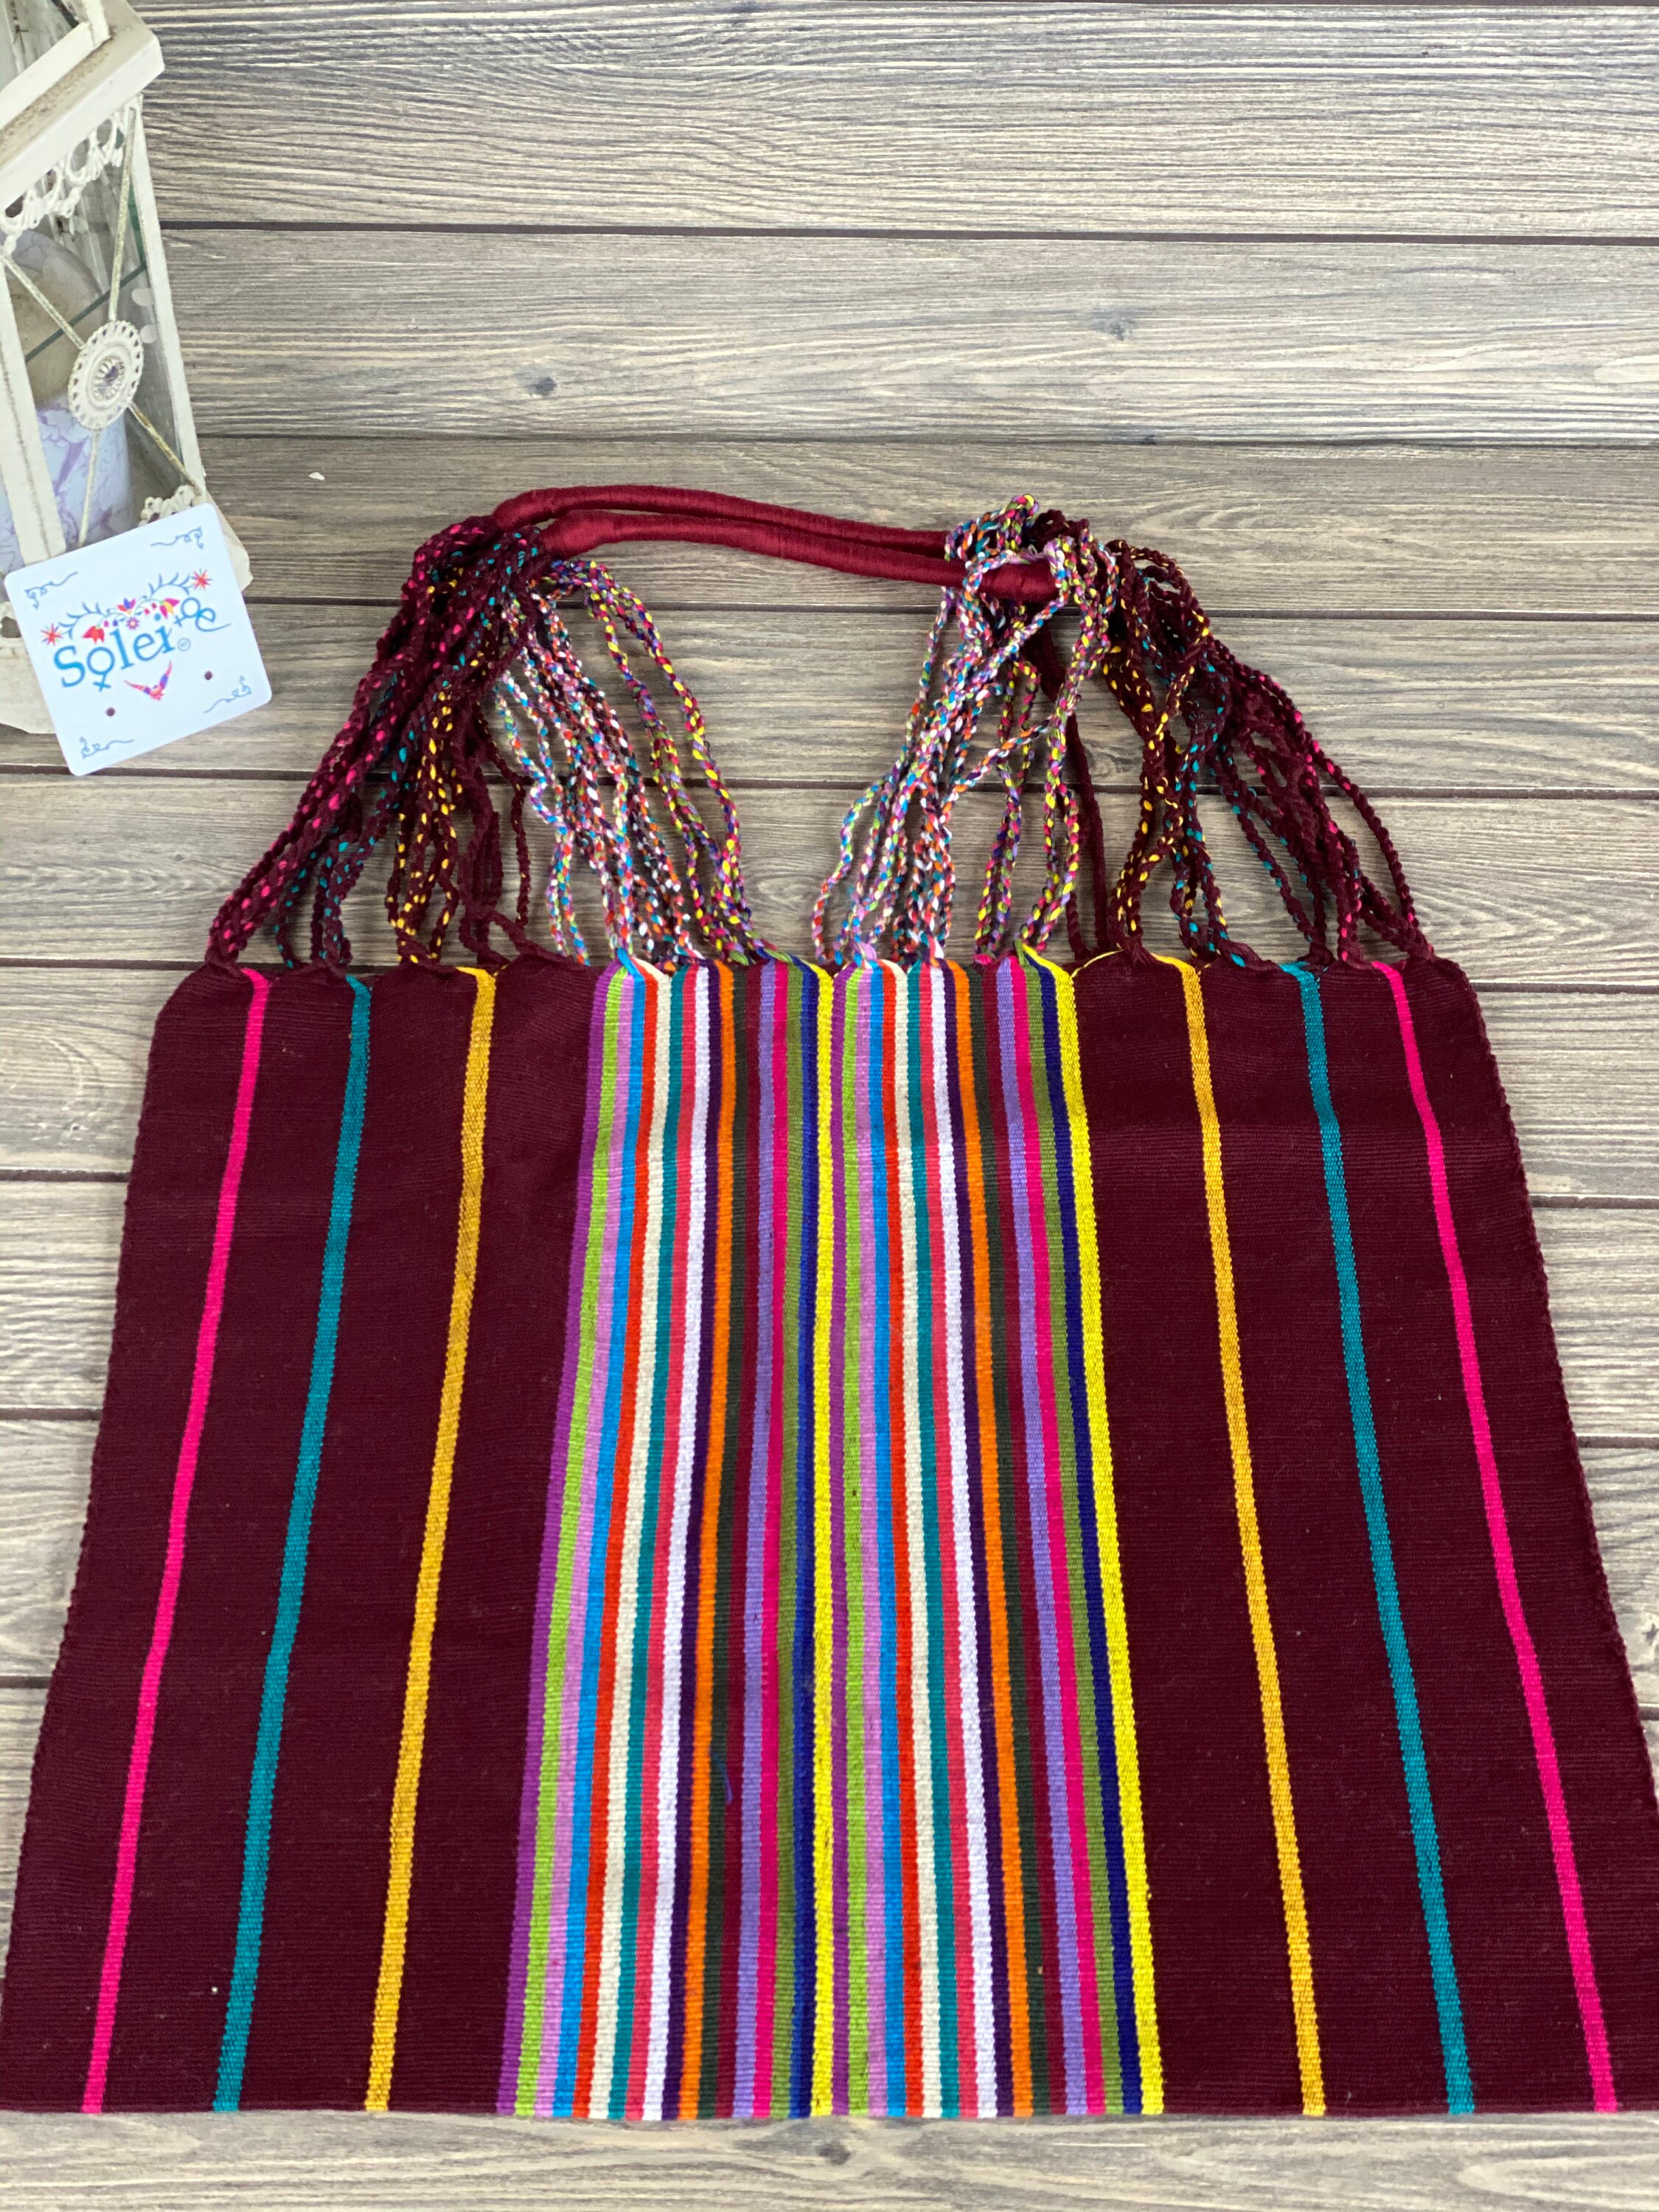 Striped Mexican Bag. Mexican Traditional Embroidered Bag. | Etsy